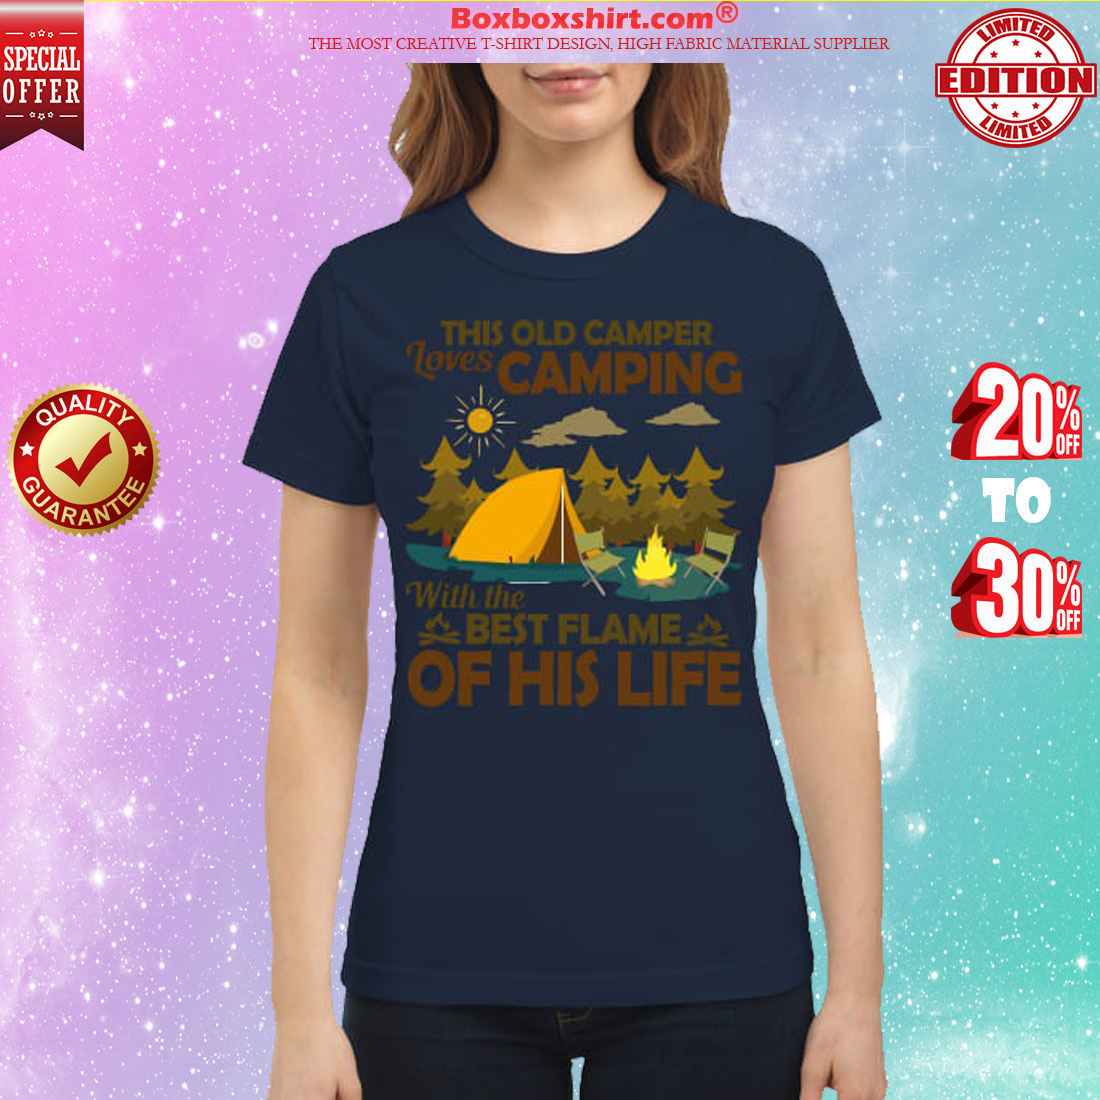 This old camper love camping with the best flame of his life classic shirt